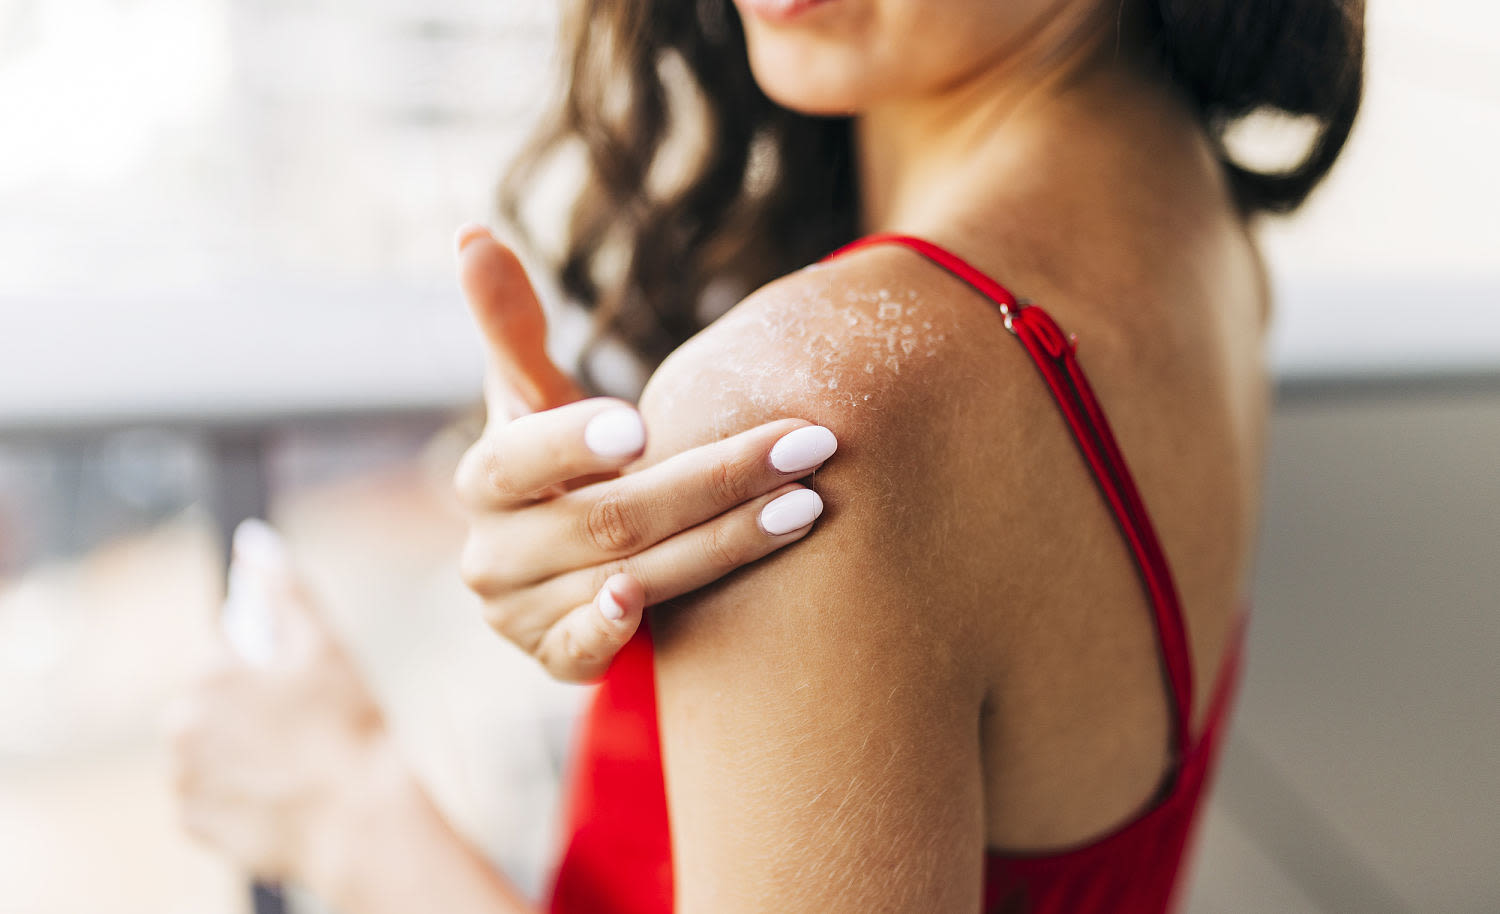 Have a sunburn? Dermatologists share 8 ways to heal and feel better — fast